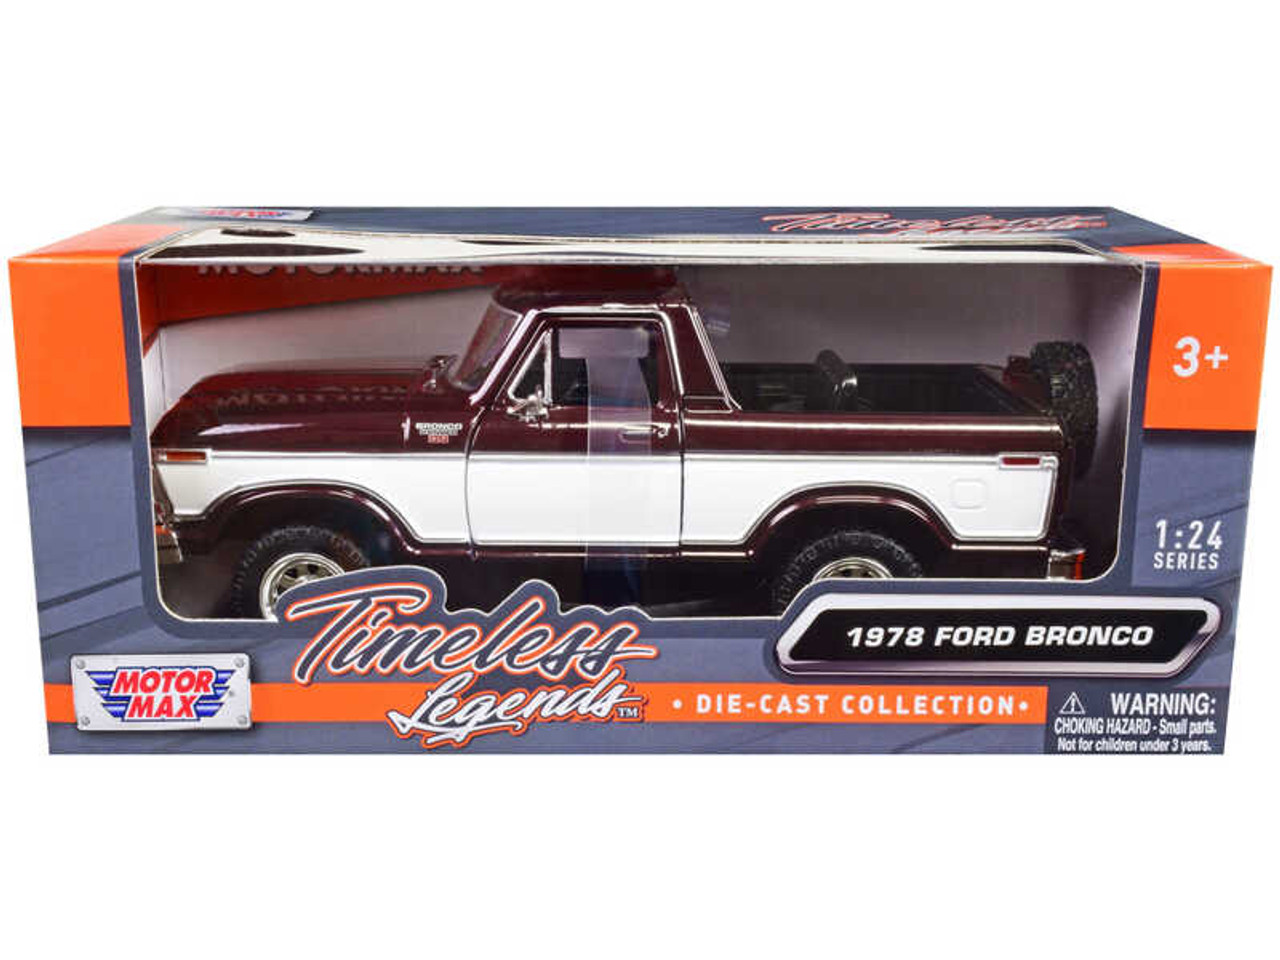 1978 Ford Bronco Ranger XLT (Open Top) with Spare Tire Burgundy Metallic and White "Timeless Legends" Series 1/24 Diecast Model Car by Motormax